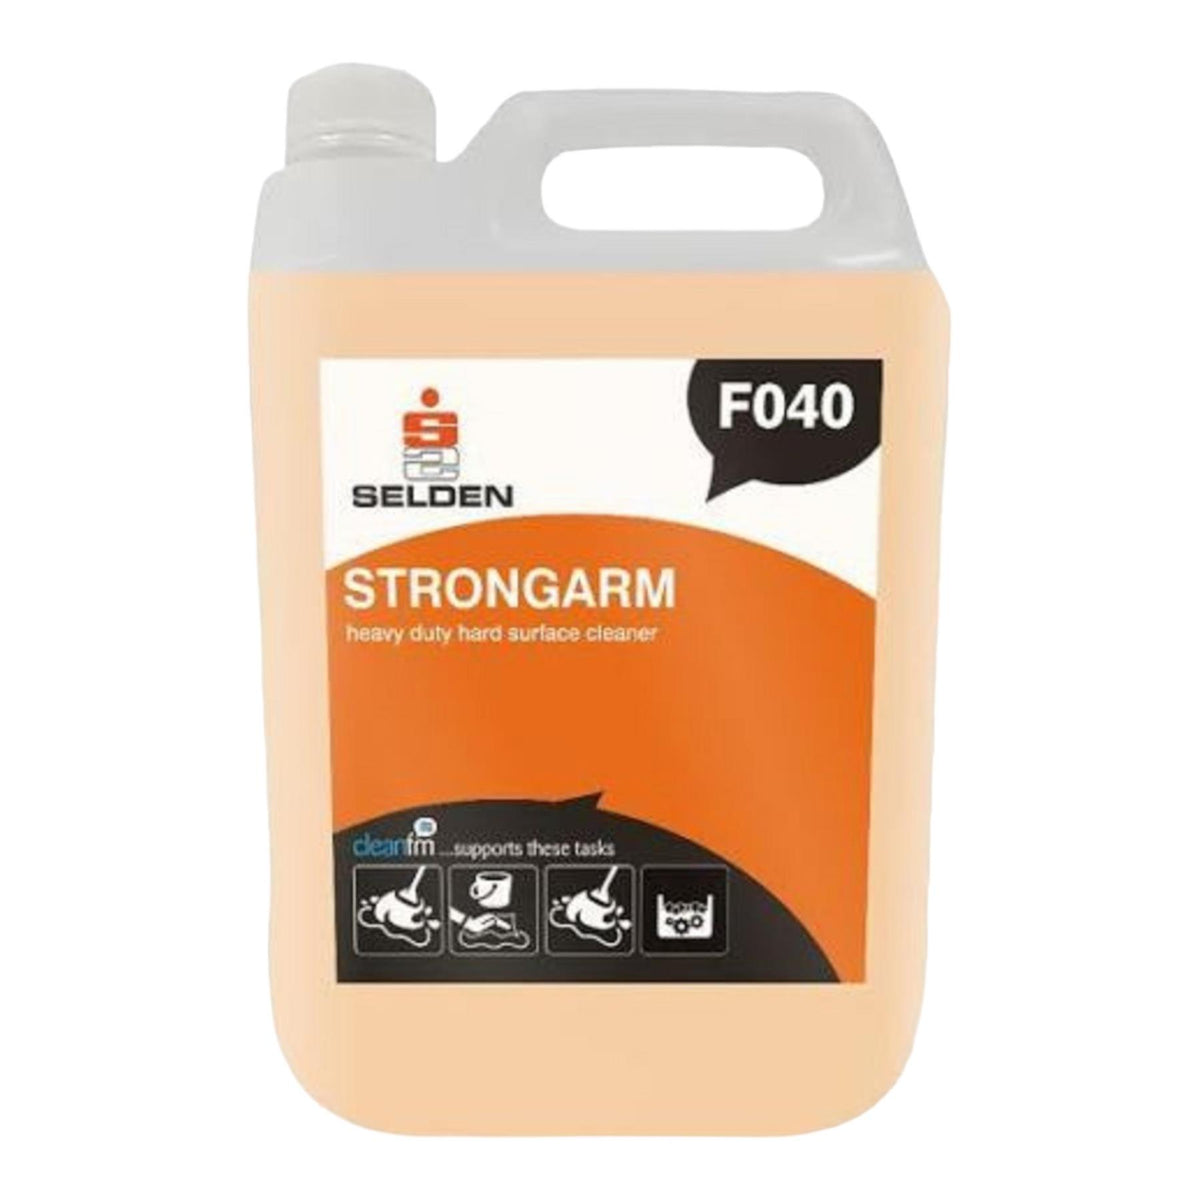 Seldon Strongarm Heavy Duty Hard Surface Cleaner 5 Litres